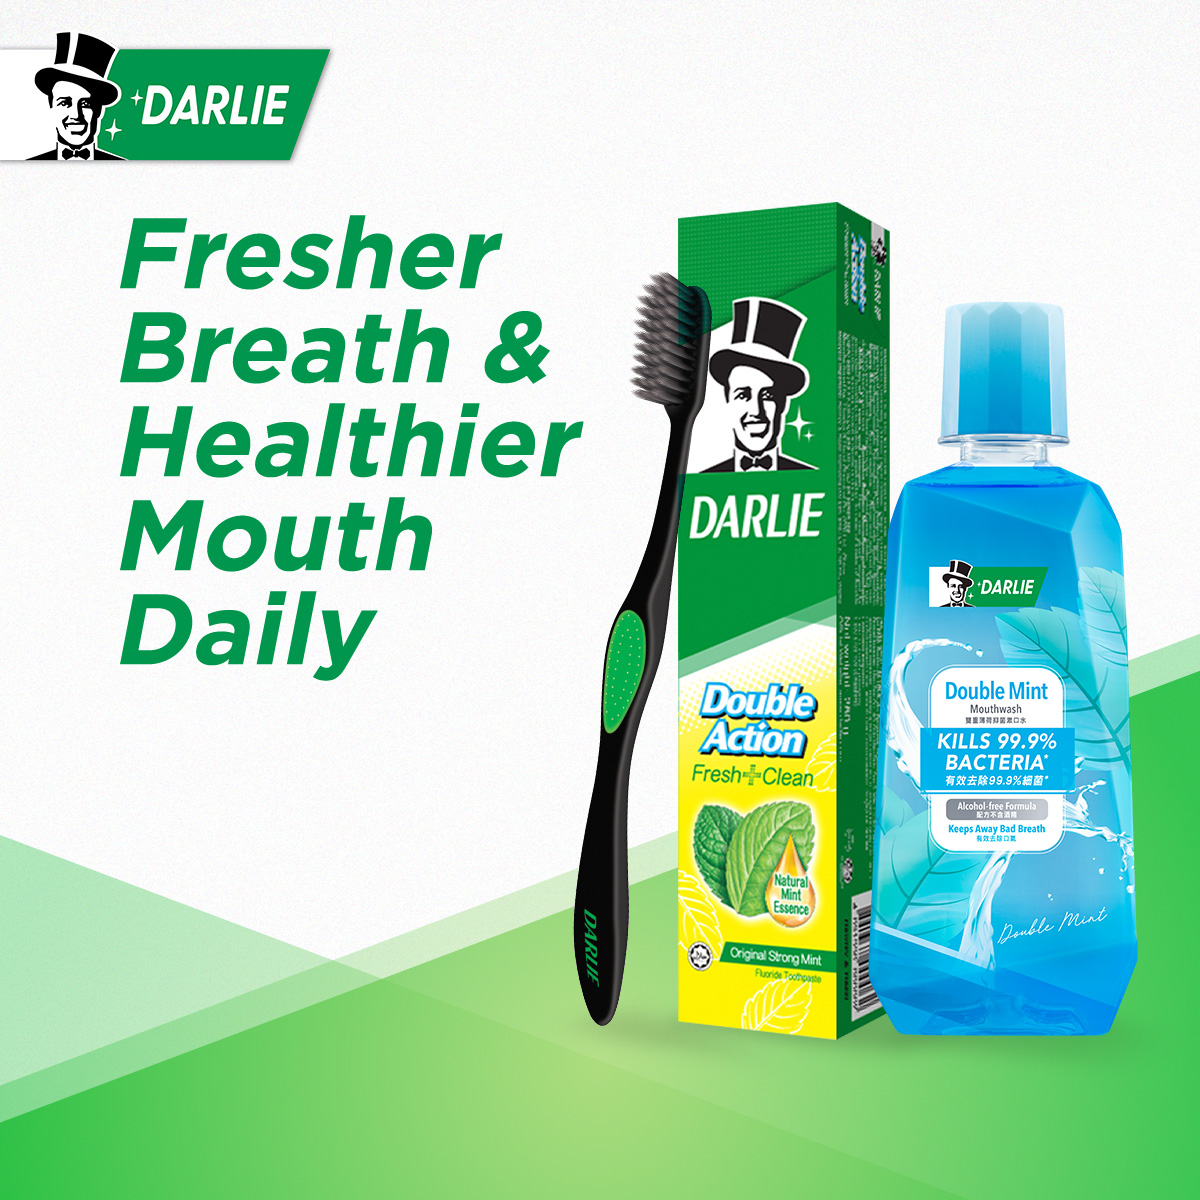 Darlie Double Action Fresh + Clean Toothpaste Original Strong Mint 50g